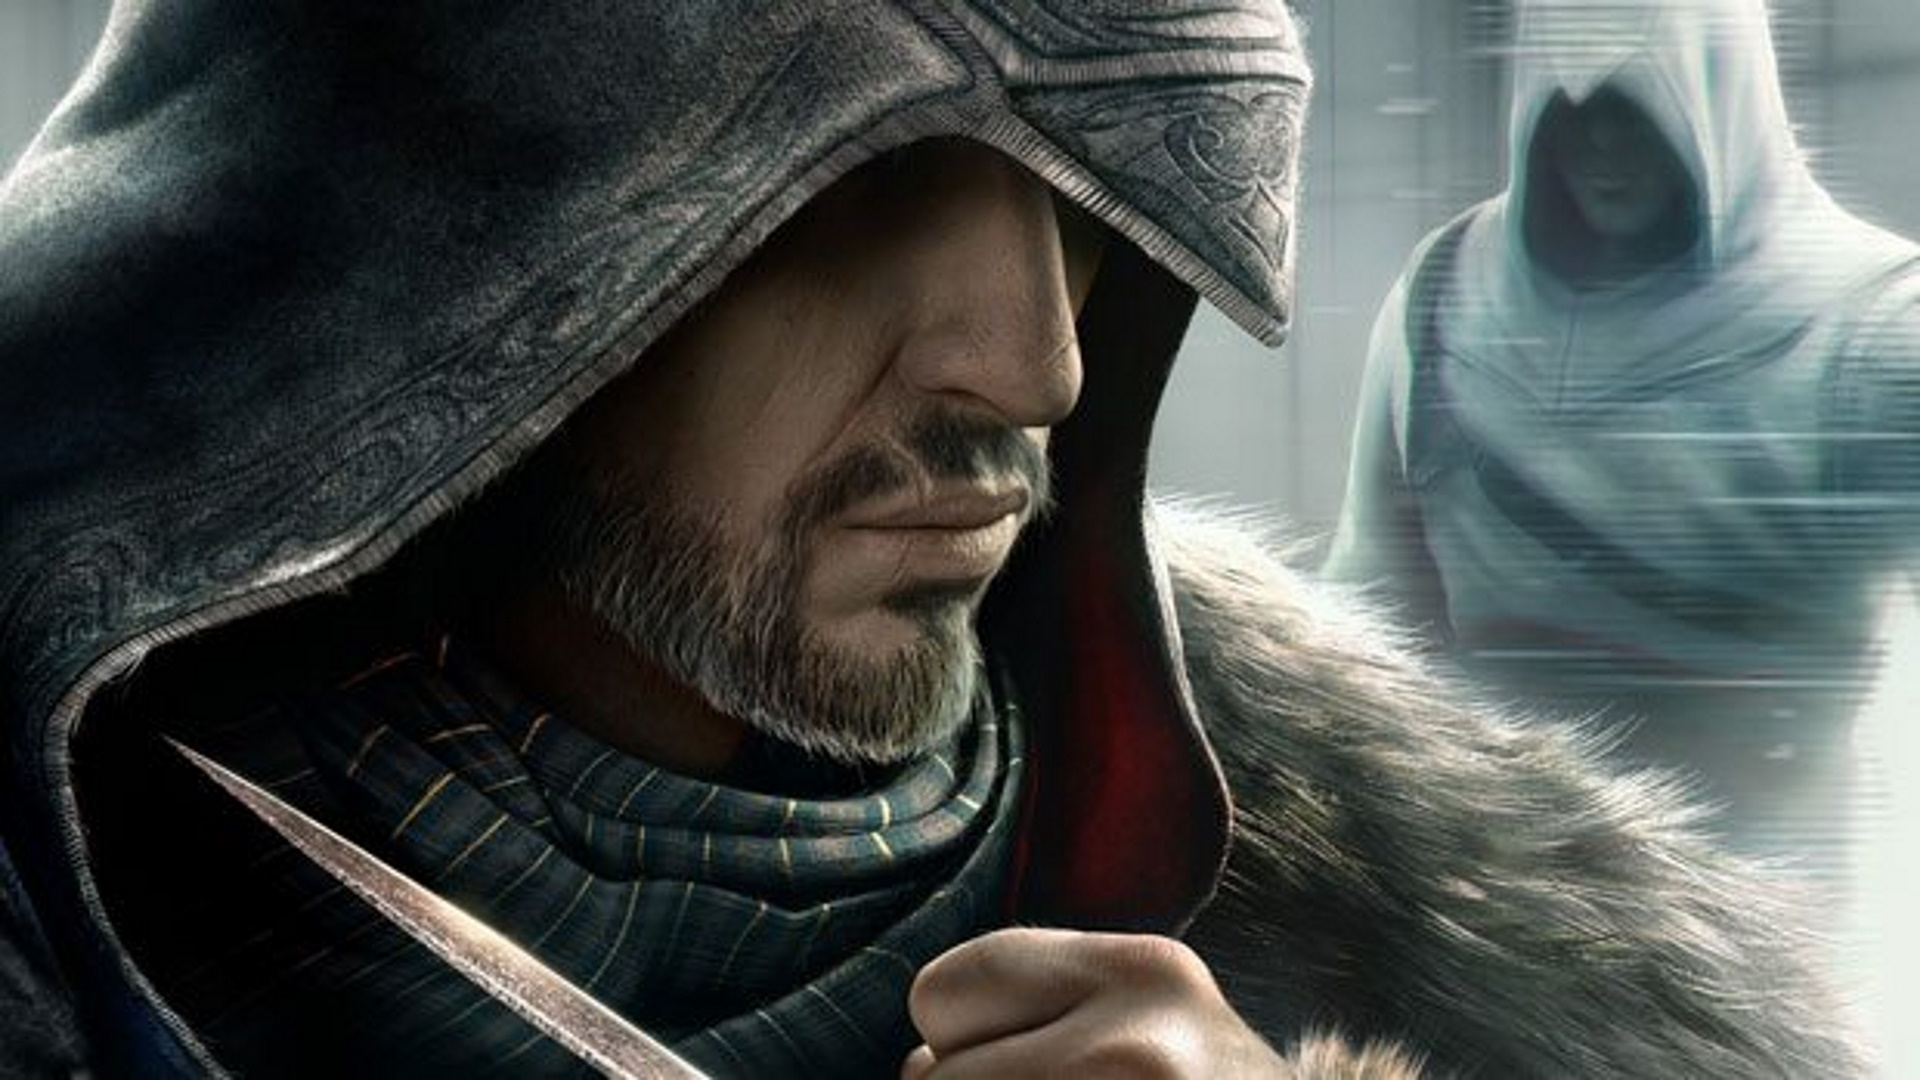 Celebrate the Assassin's Creed anniversary with discounts